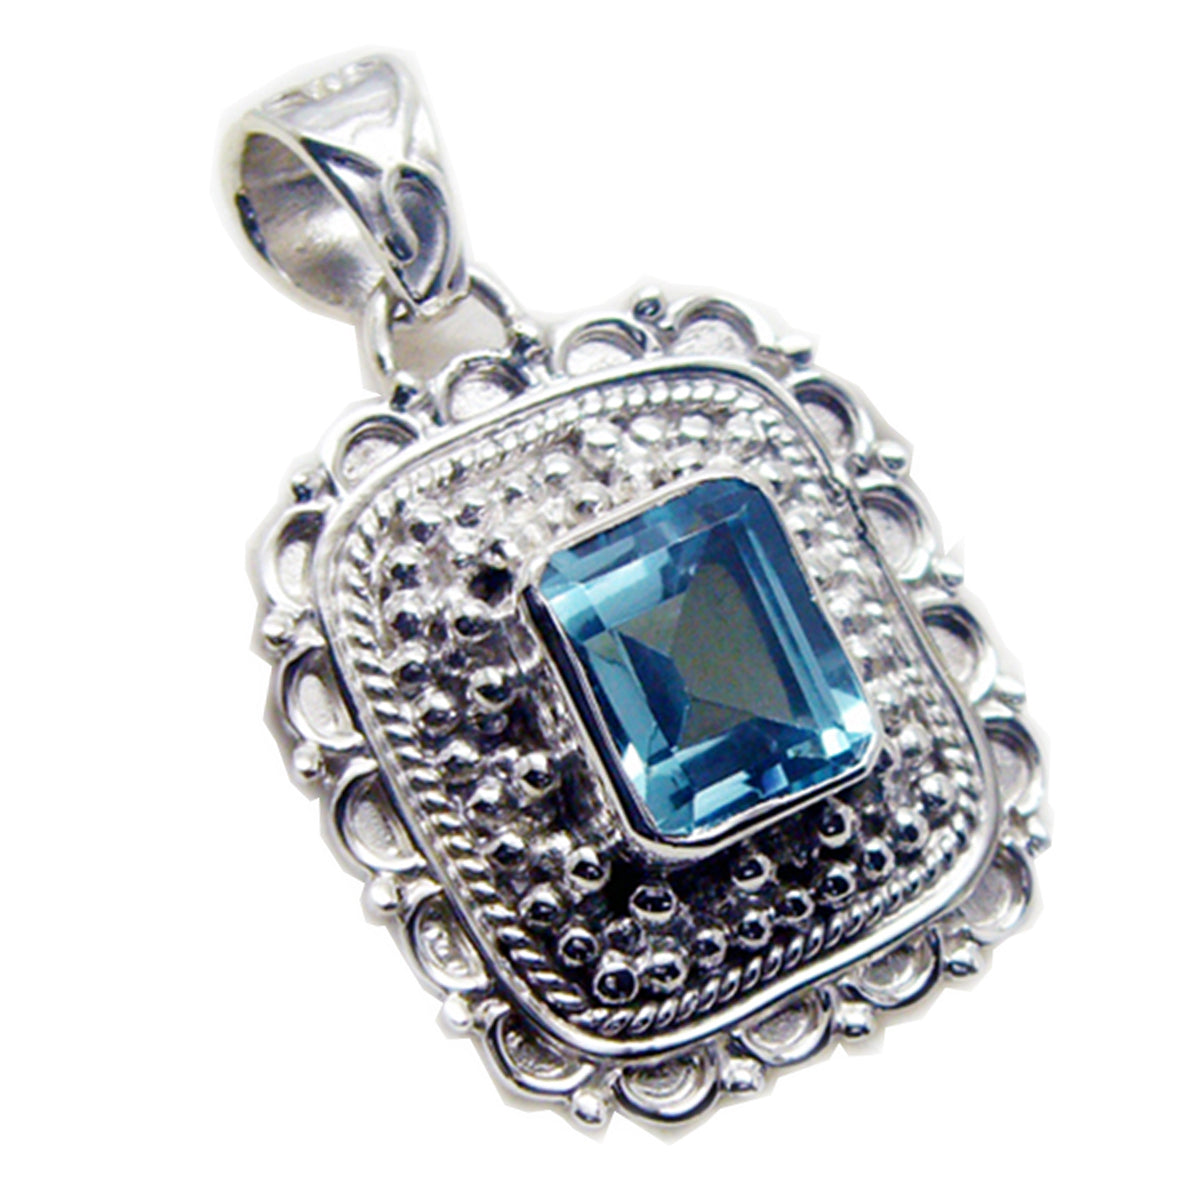 Riyo Genuine Gems Octogon Faceted Blue Blue Topaz Solid Silver Pendant gift for good Friday